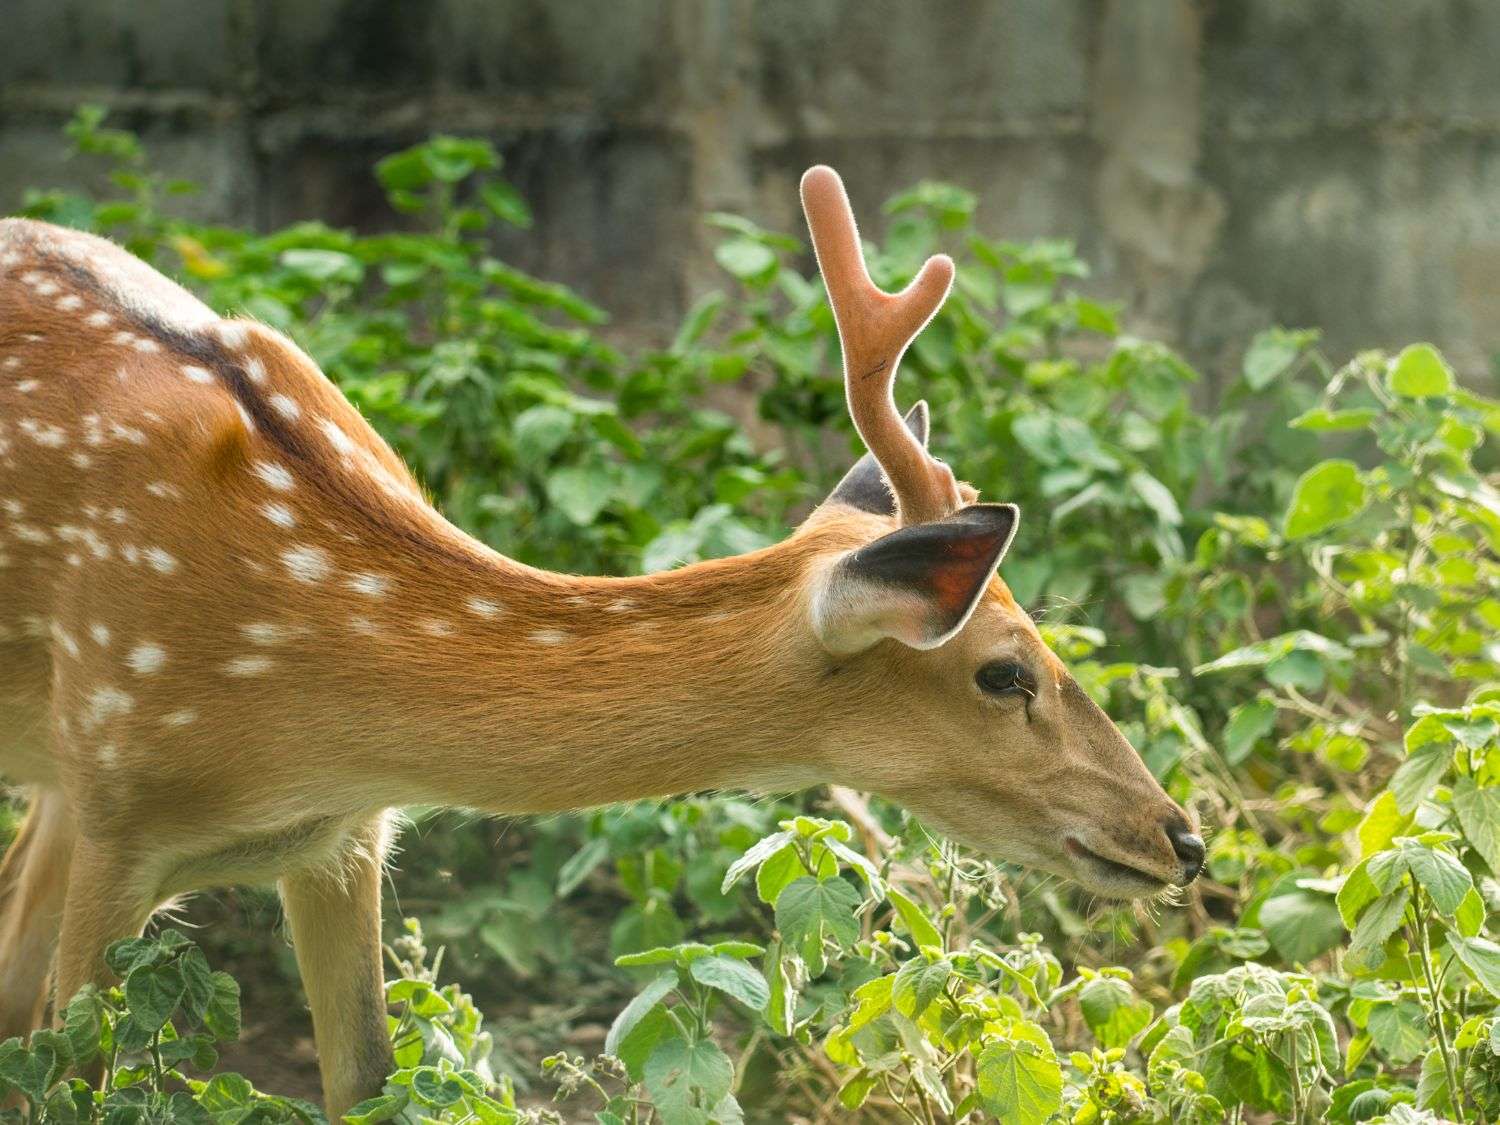 A photo of a spotted deer in a garden